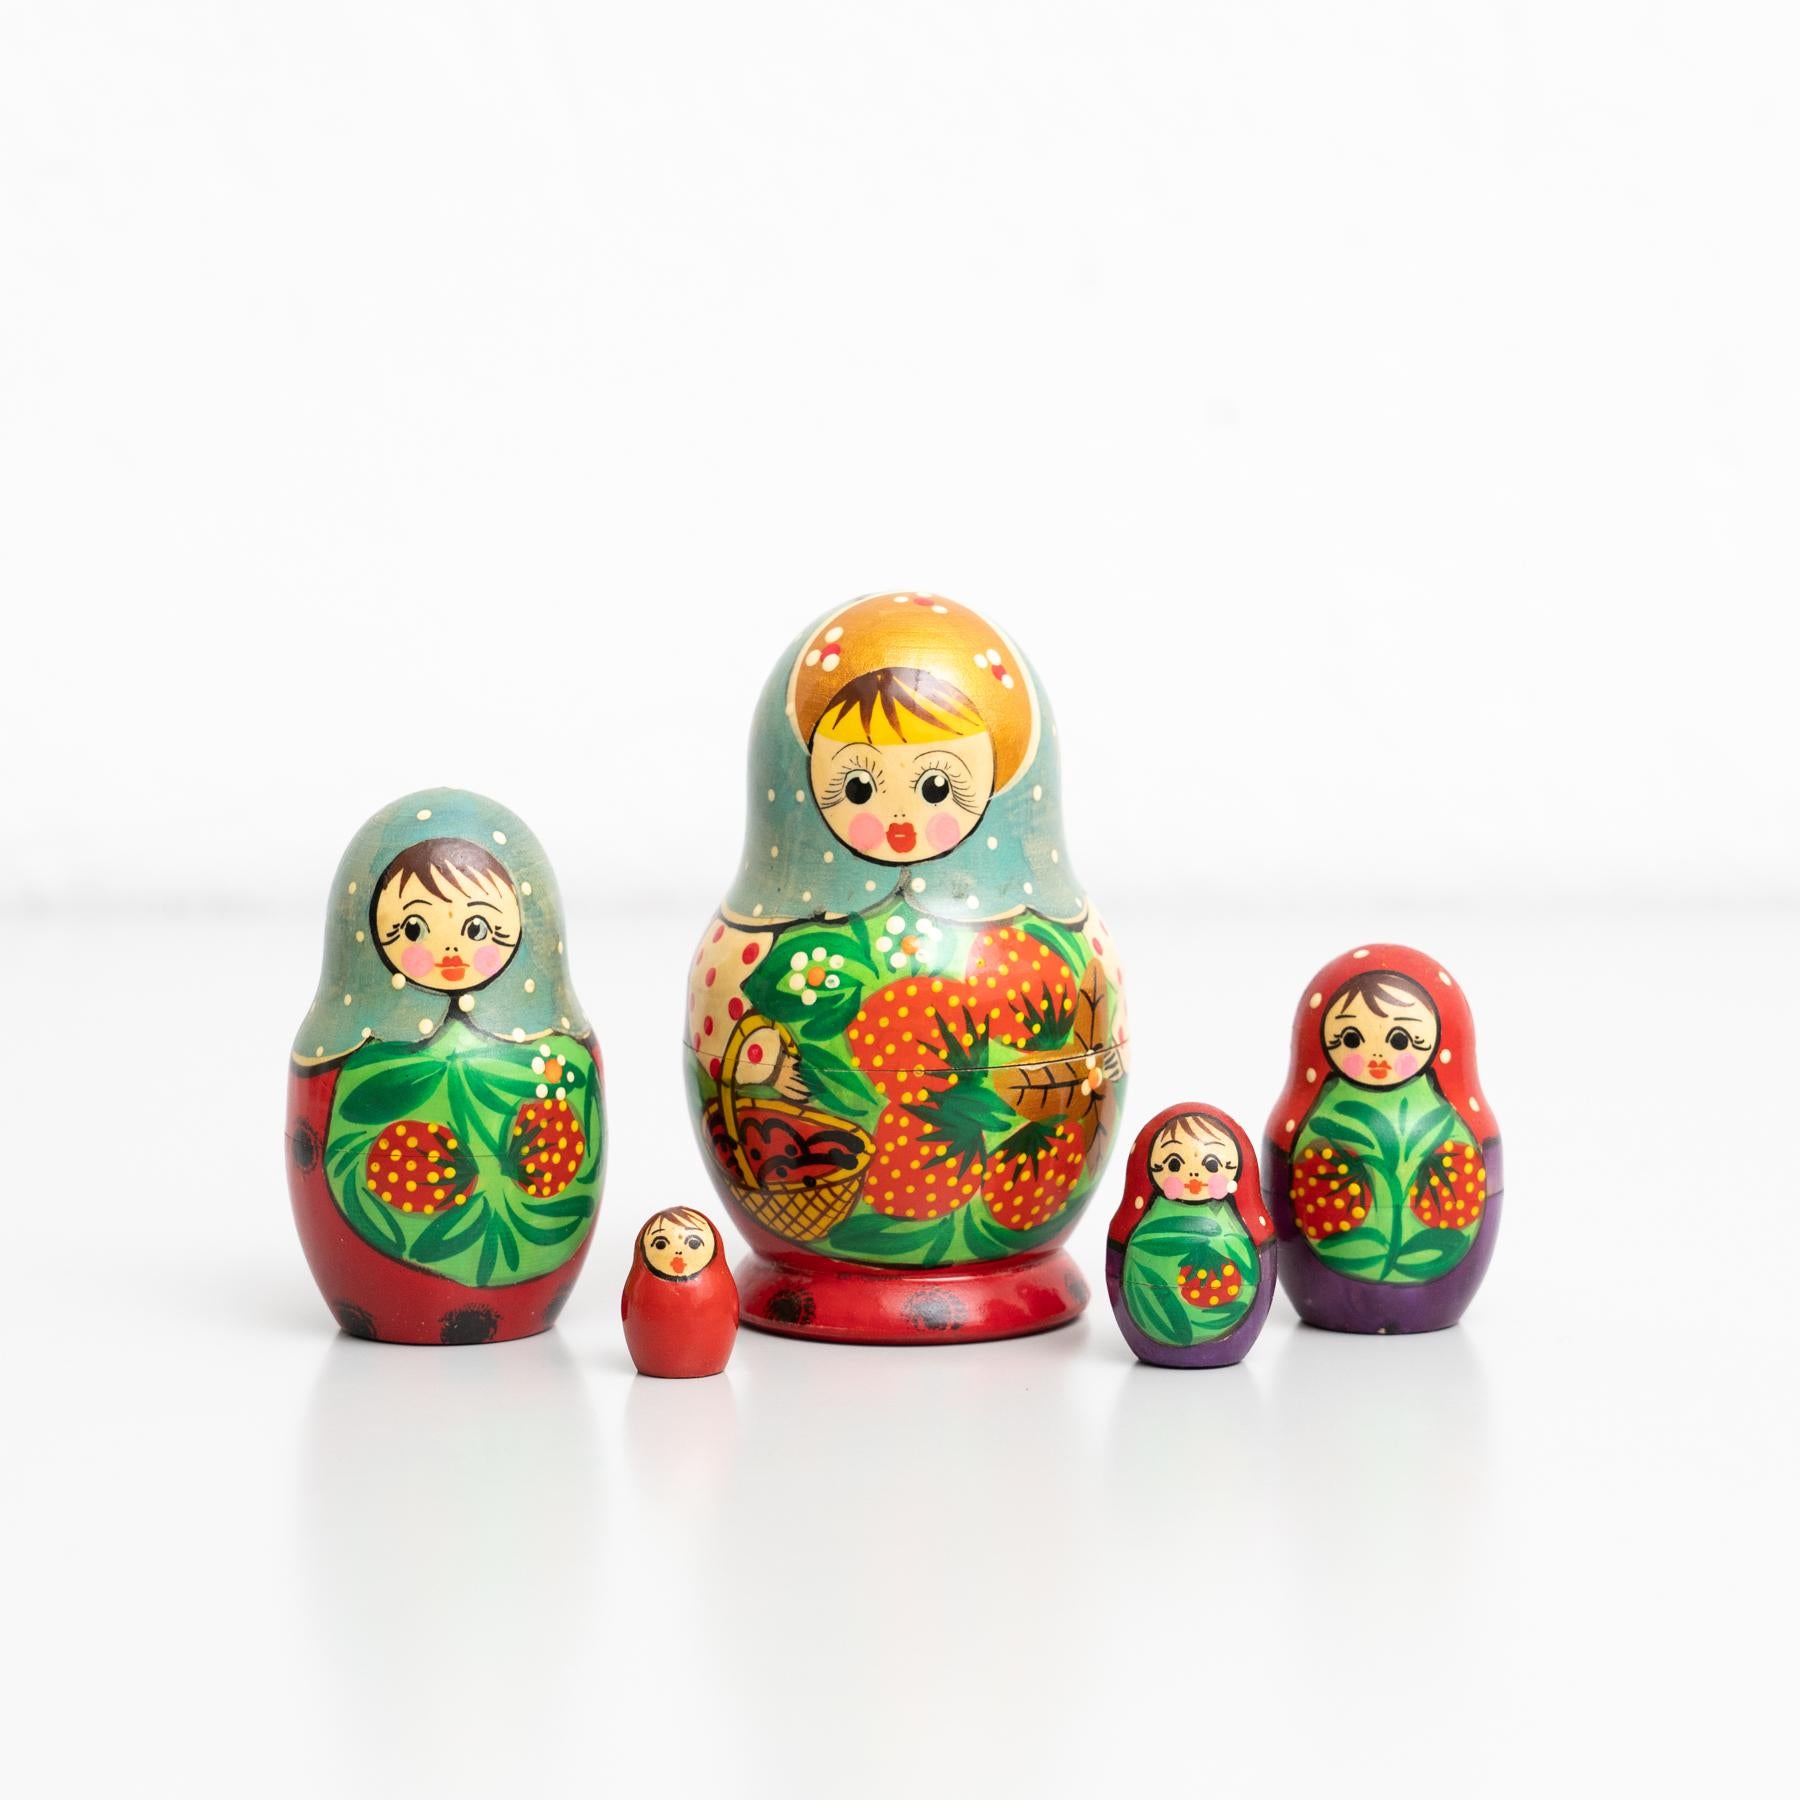 Antique Traditional Hand-Painted Wooden Russian Doll, circa 1960 For Sale 9